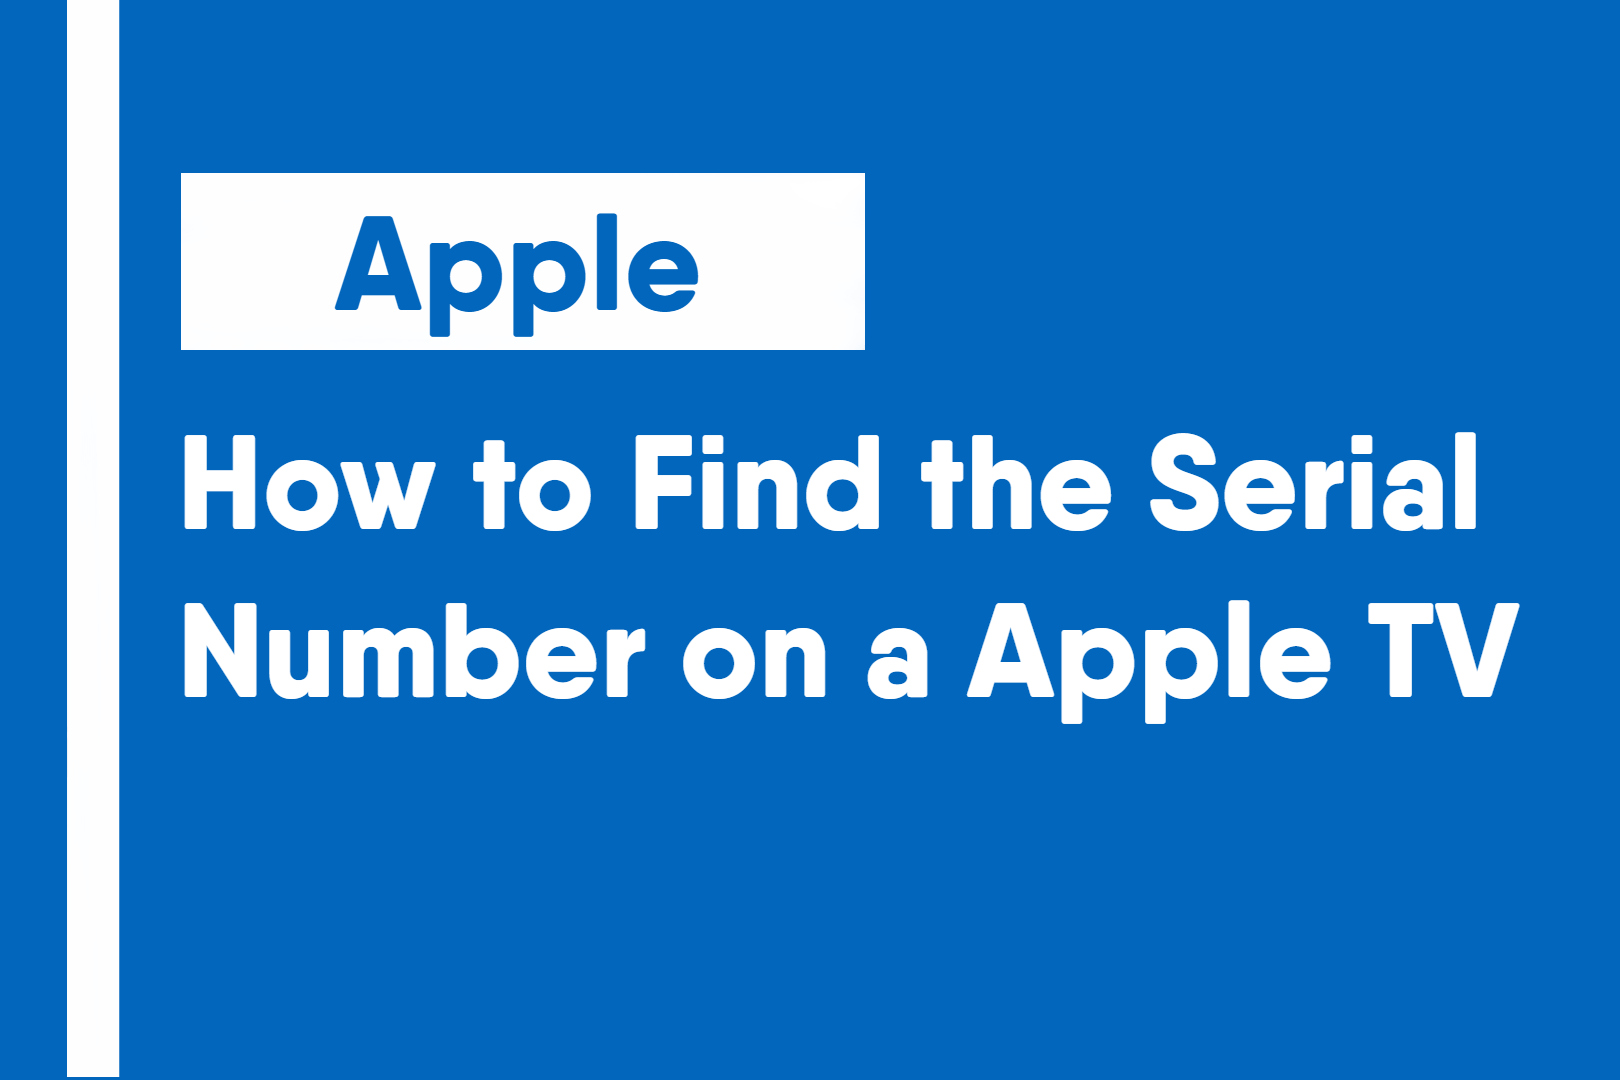 How to Find the Serial Number on an Apple TV